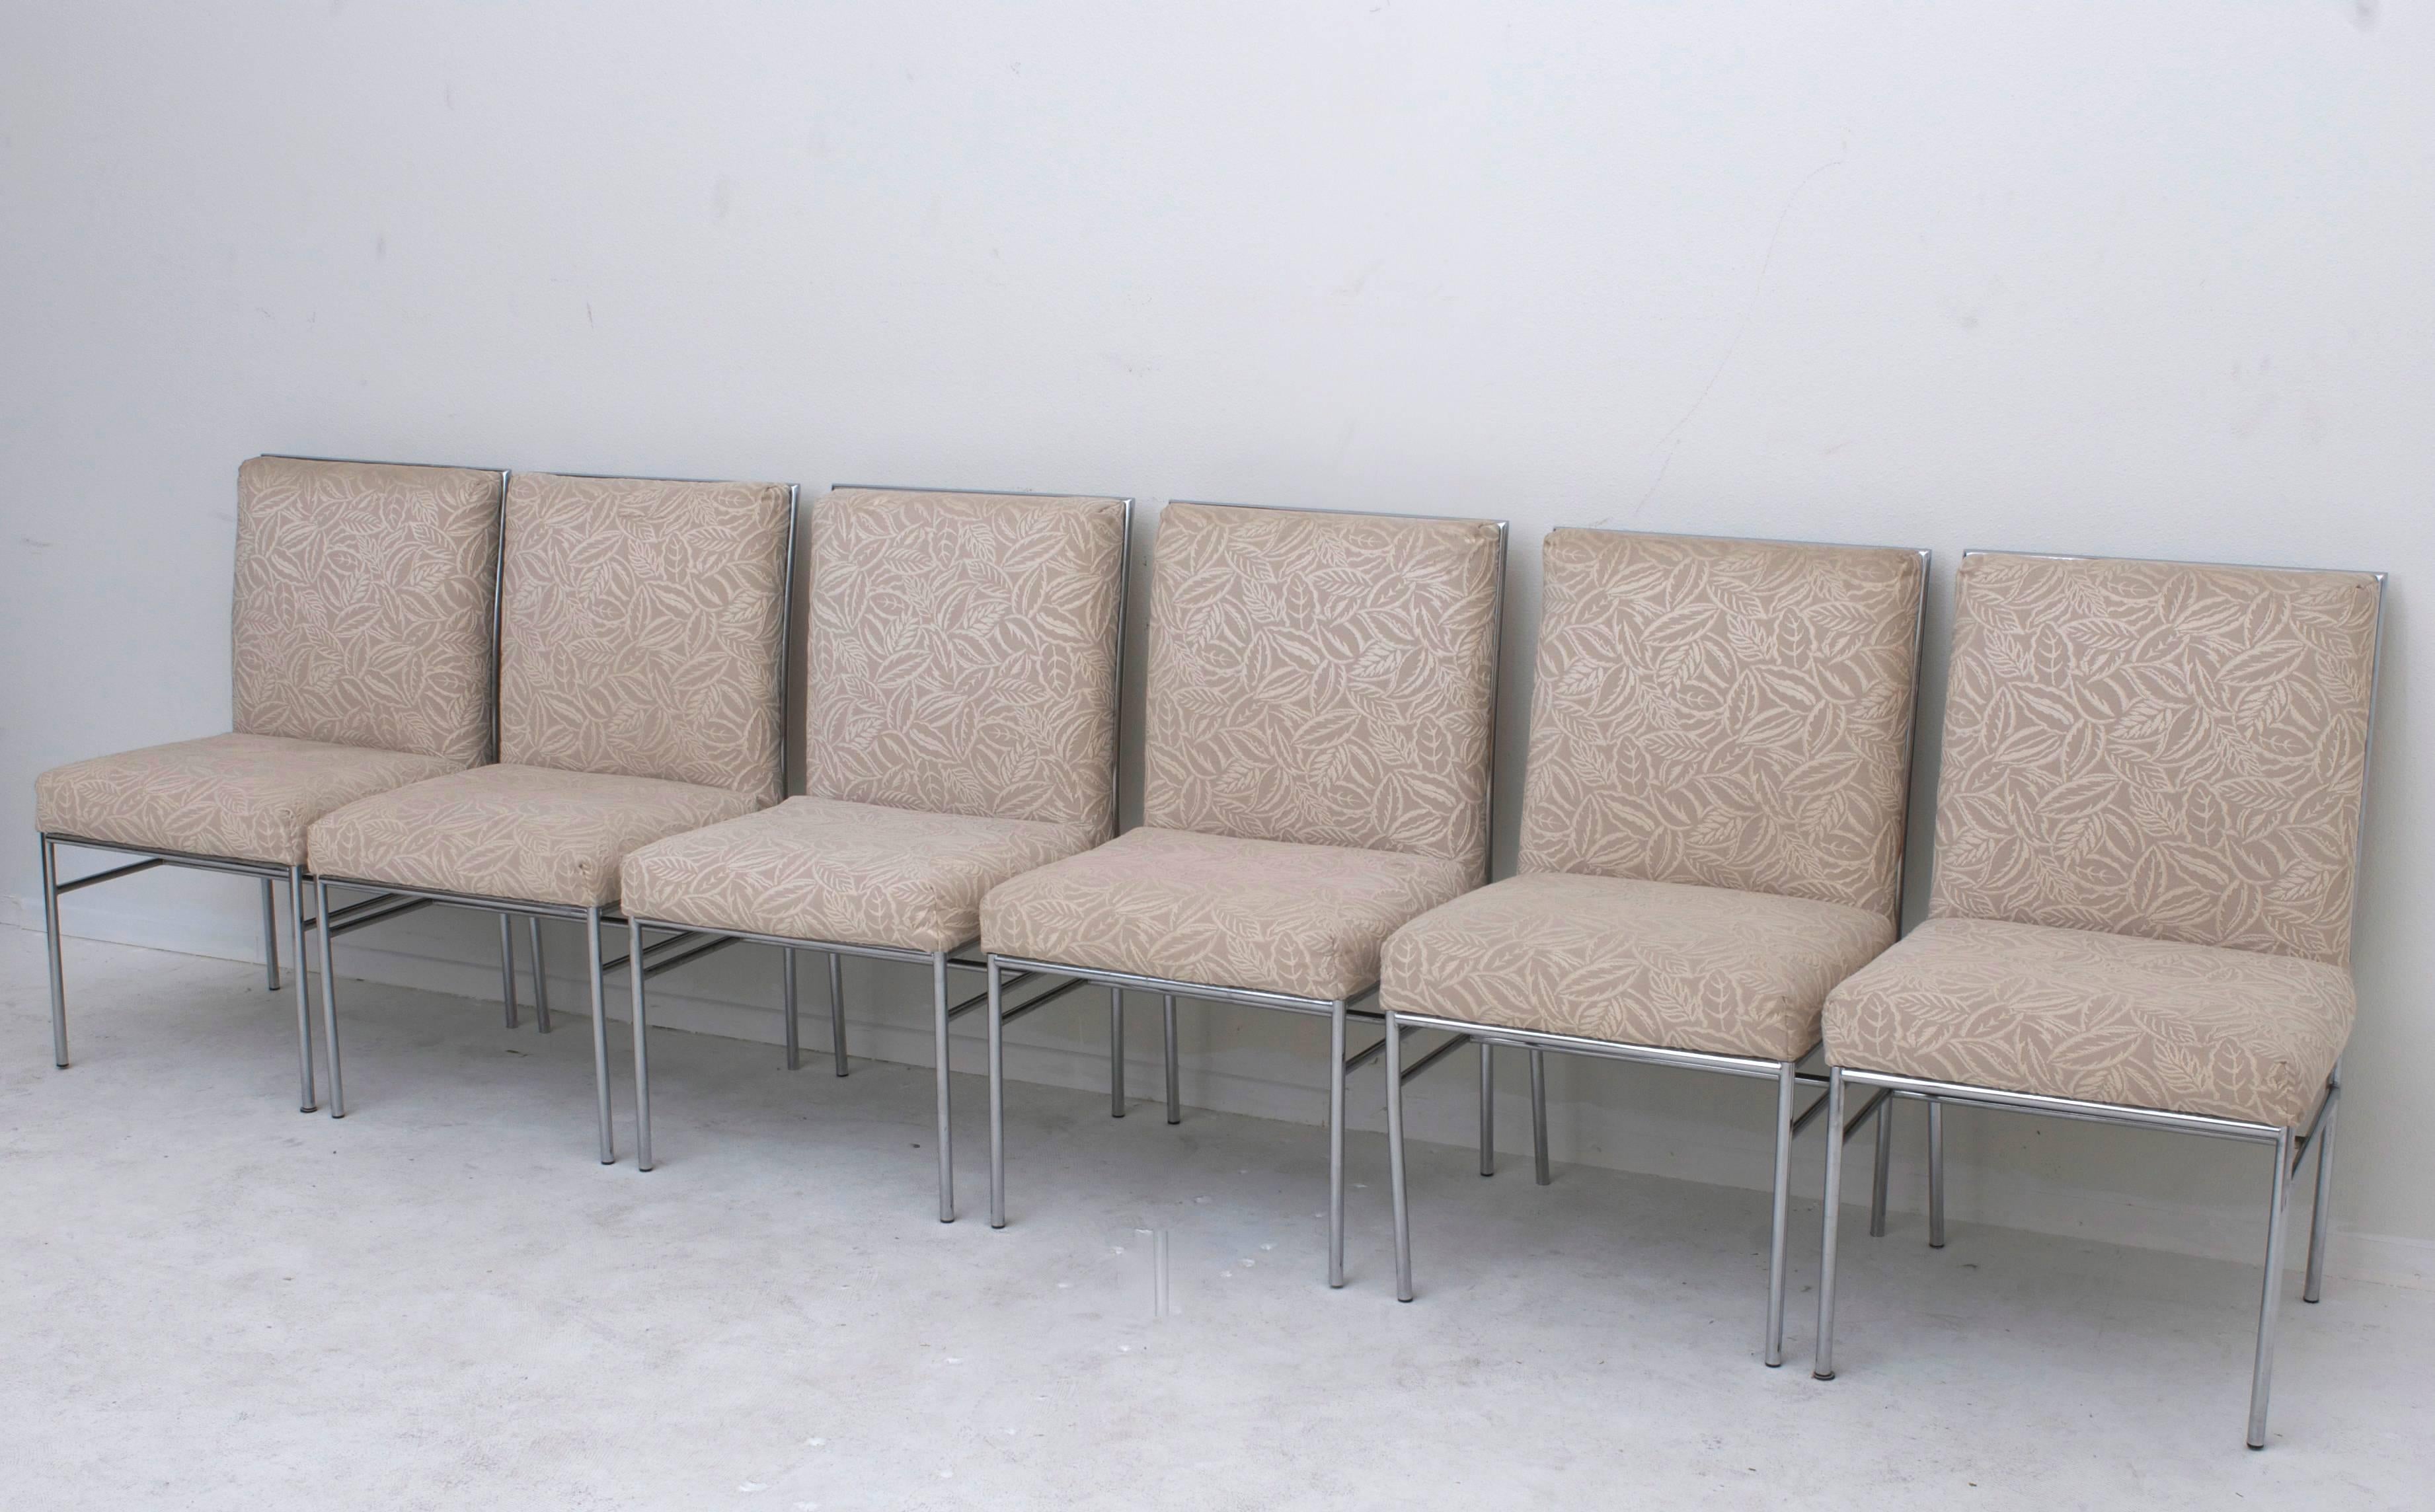 A set of six 1970s era high back dining chairs with chromed tubular frames. The upholstery is vintage.